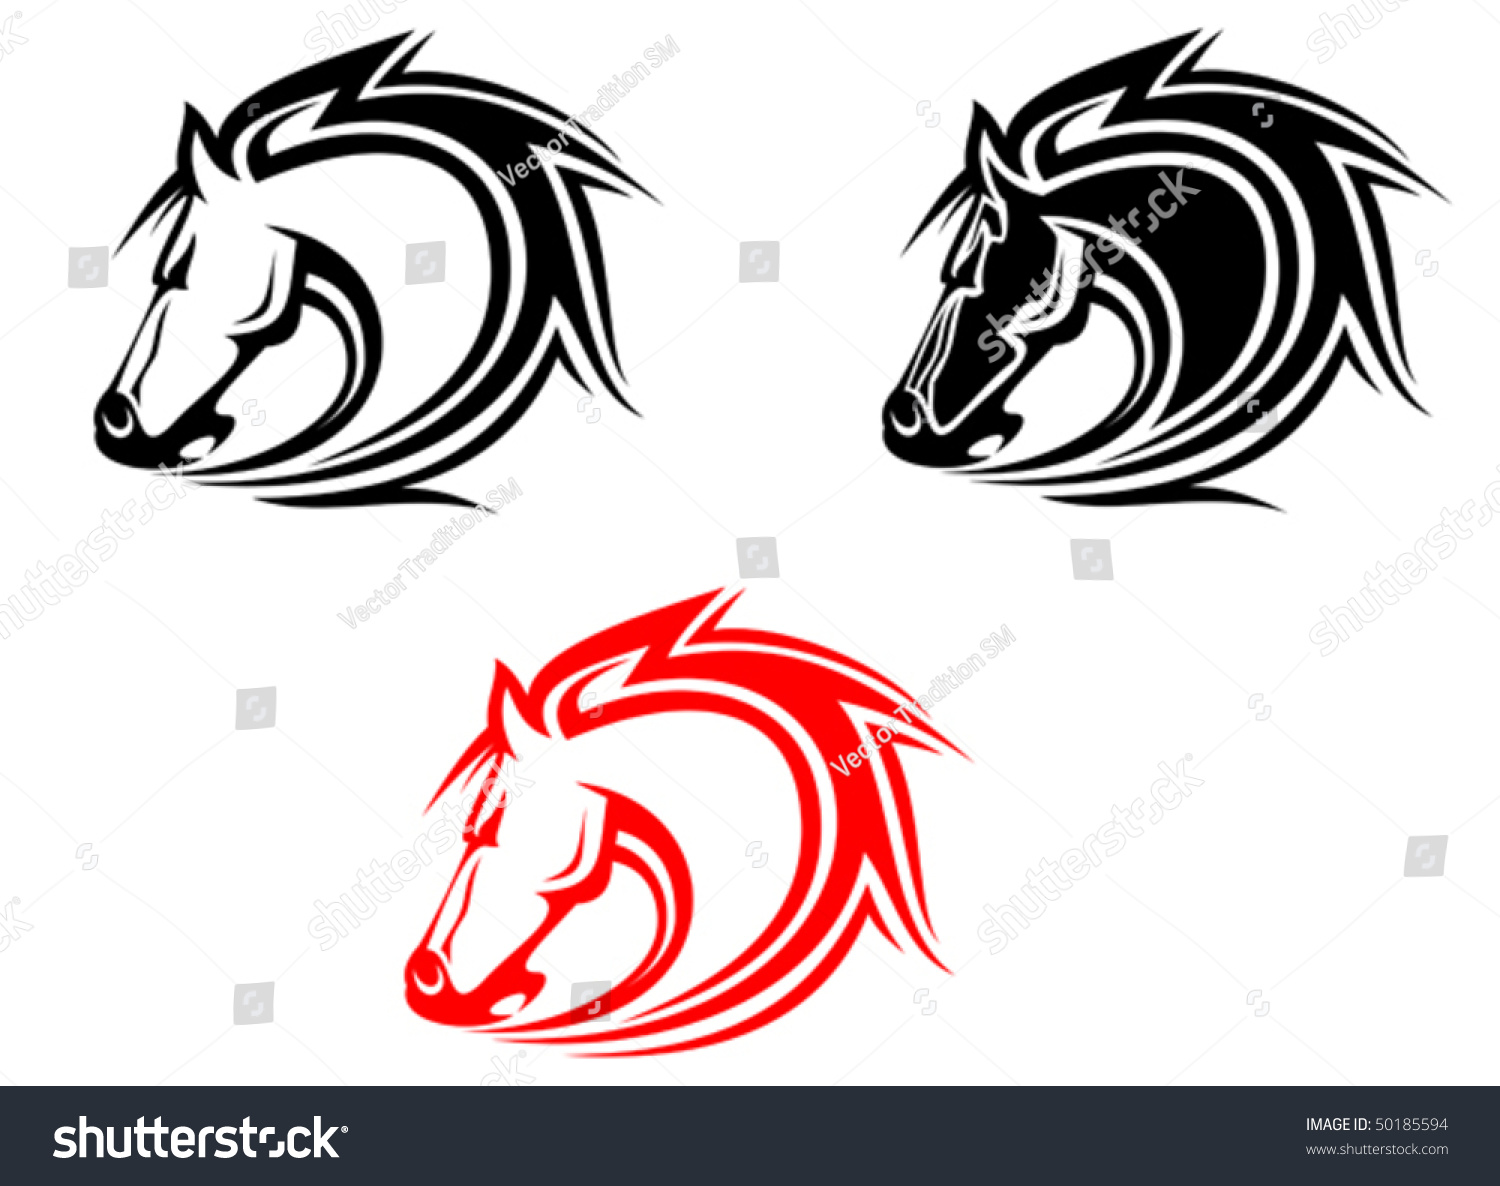 stock-vector-set-of-wild-mustang-horses-tattoos-isolated-on-white-or-logo-template-50185594.jpg